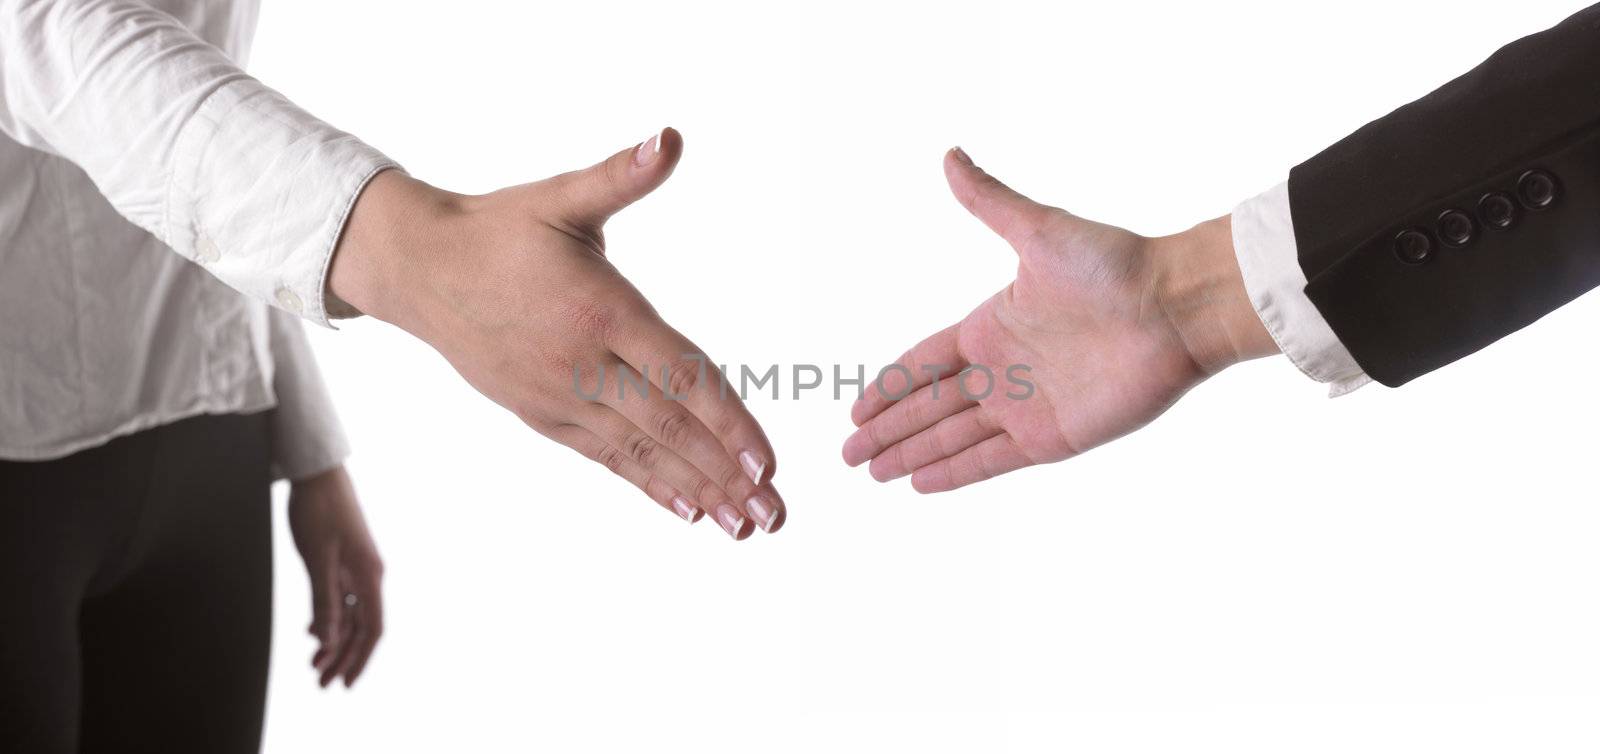 Hands Ready For Handshaking by adamr